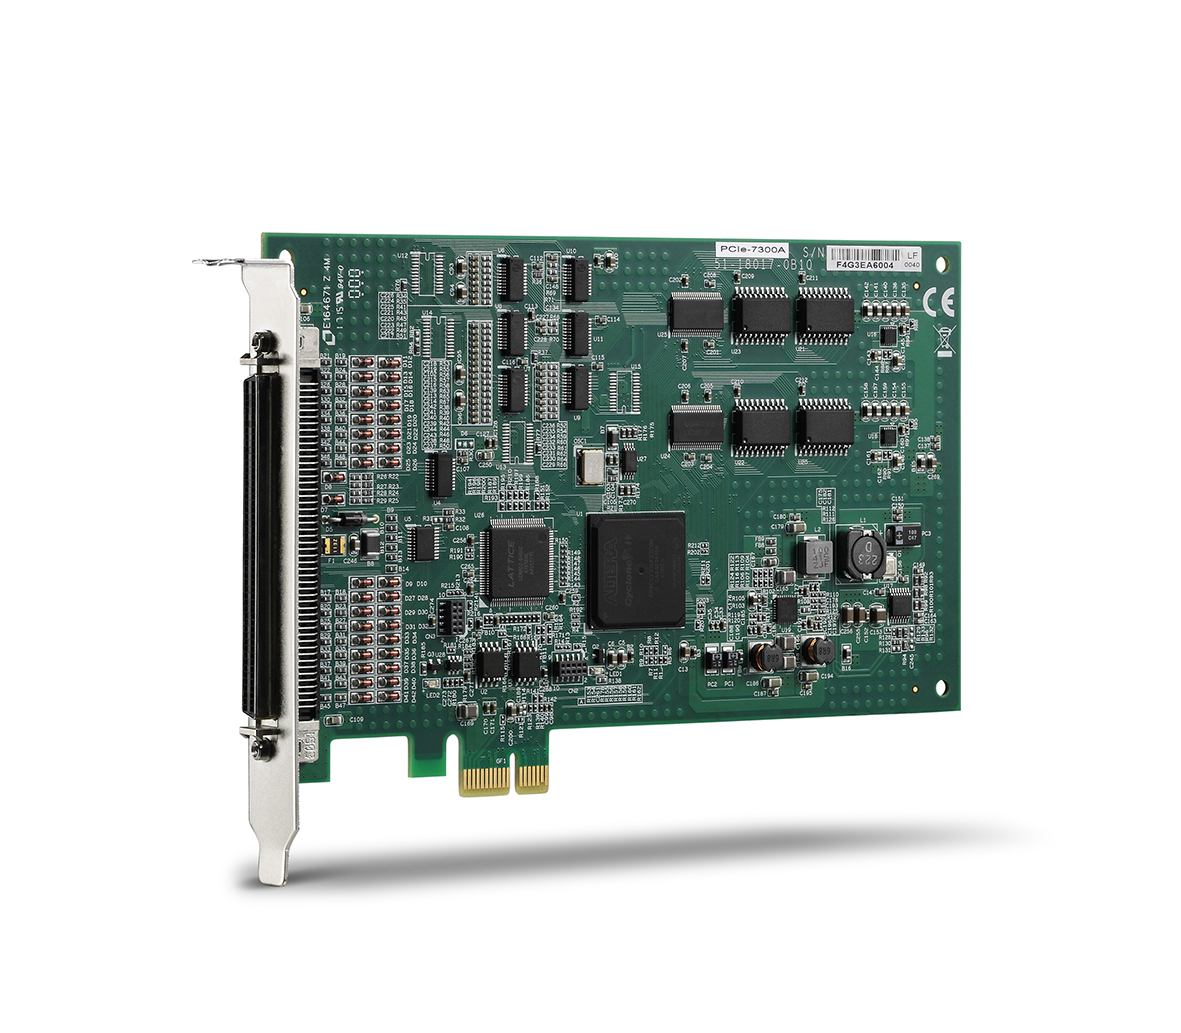 Pcie 7300a High Speed Dio Adlink